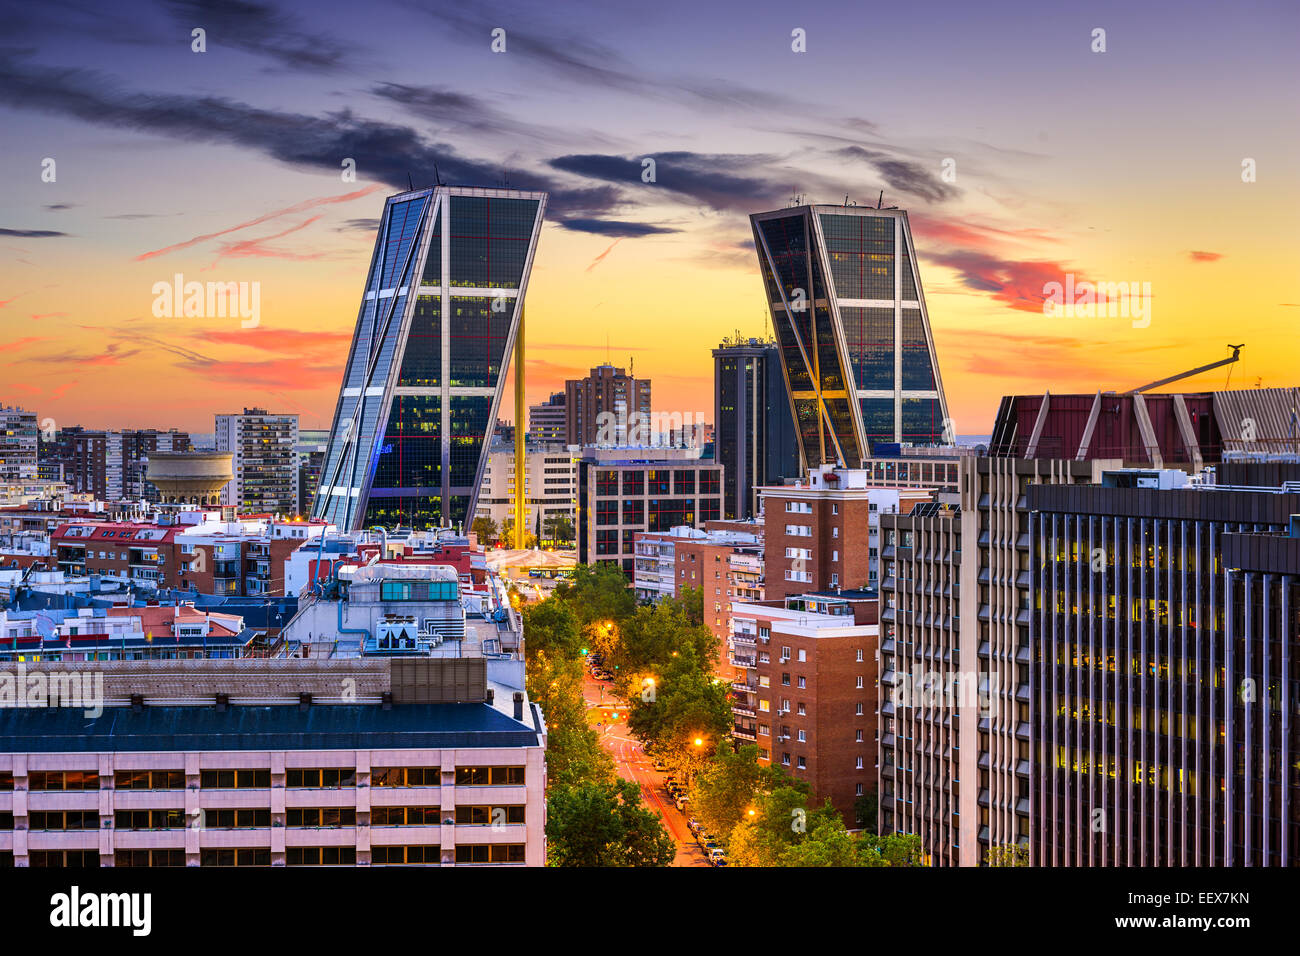 Madrid, Spain financial district skyline at twilight viewed towards the Gate of Europe Plaza. Stock Photo